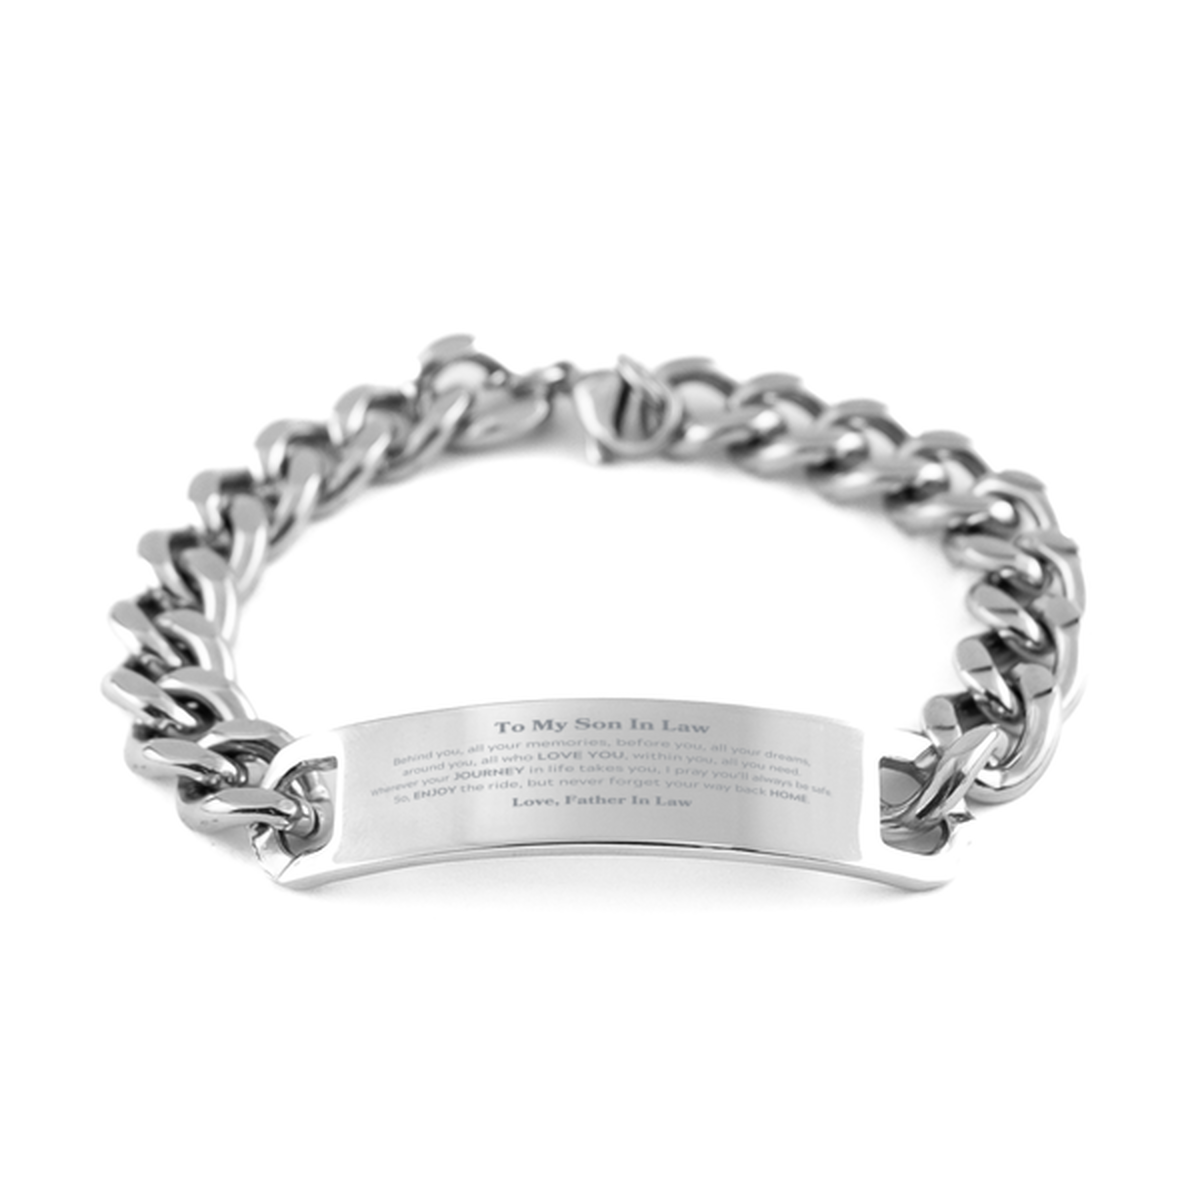 To My Son In Law Graduation Gifts from Father In Law, Son In Law Cuban Chain Stainless Steel Bracelet Christmas Birthday Gifts for Son In Law Behind you, all your memories, before you, all your dreams. Love, Father In Law